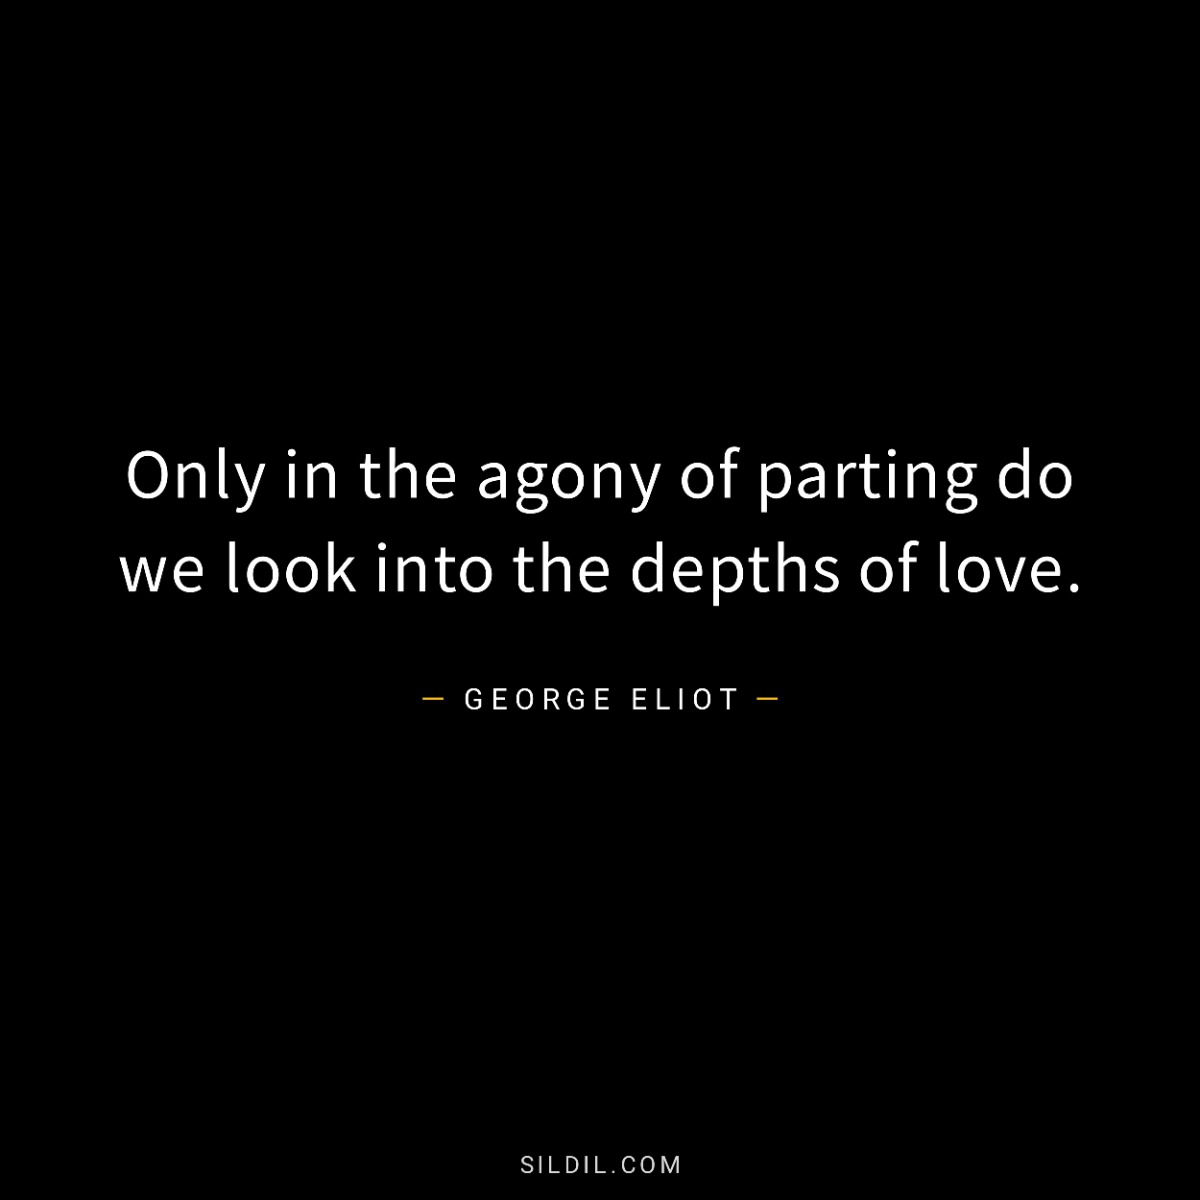 Only in the agony of parting do we look into the depths of love.